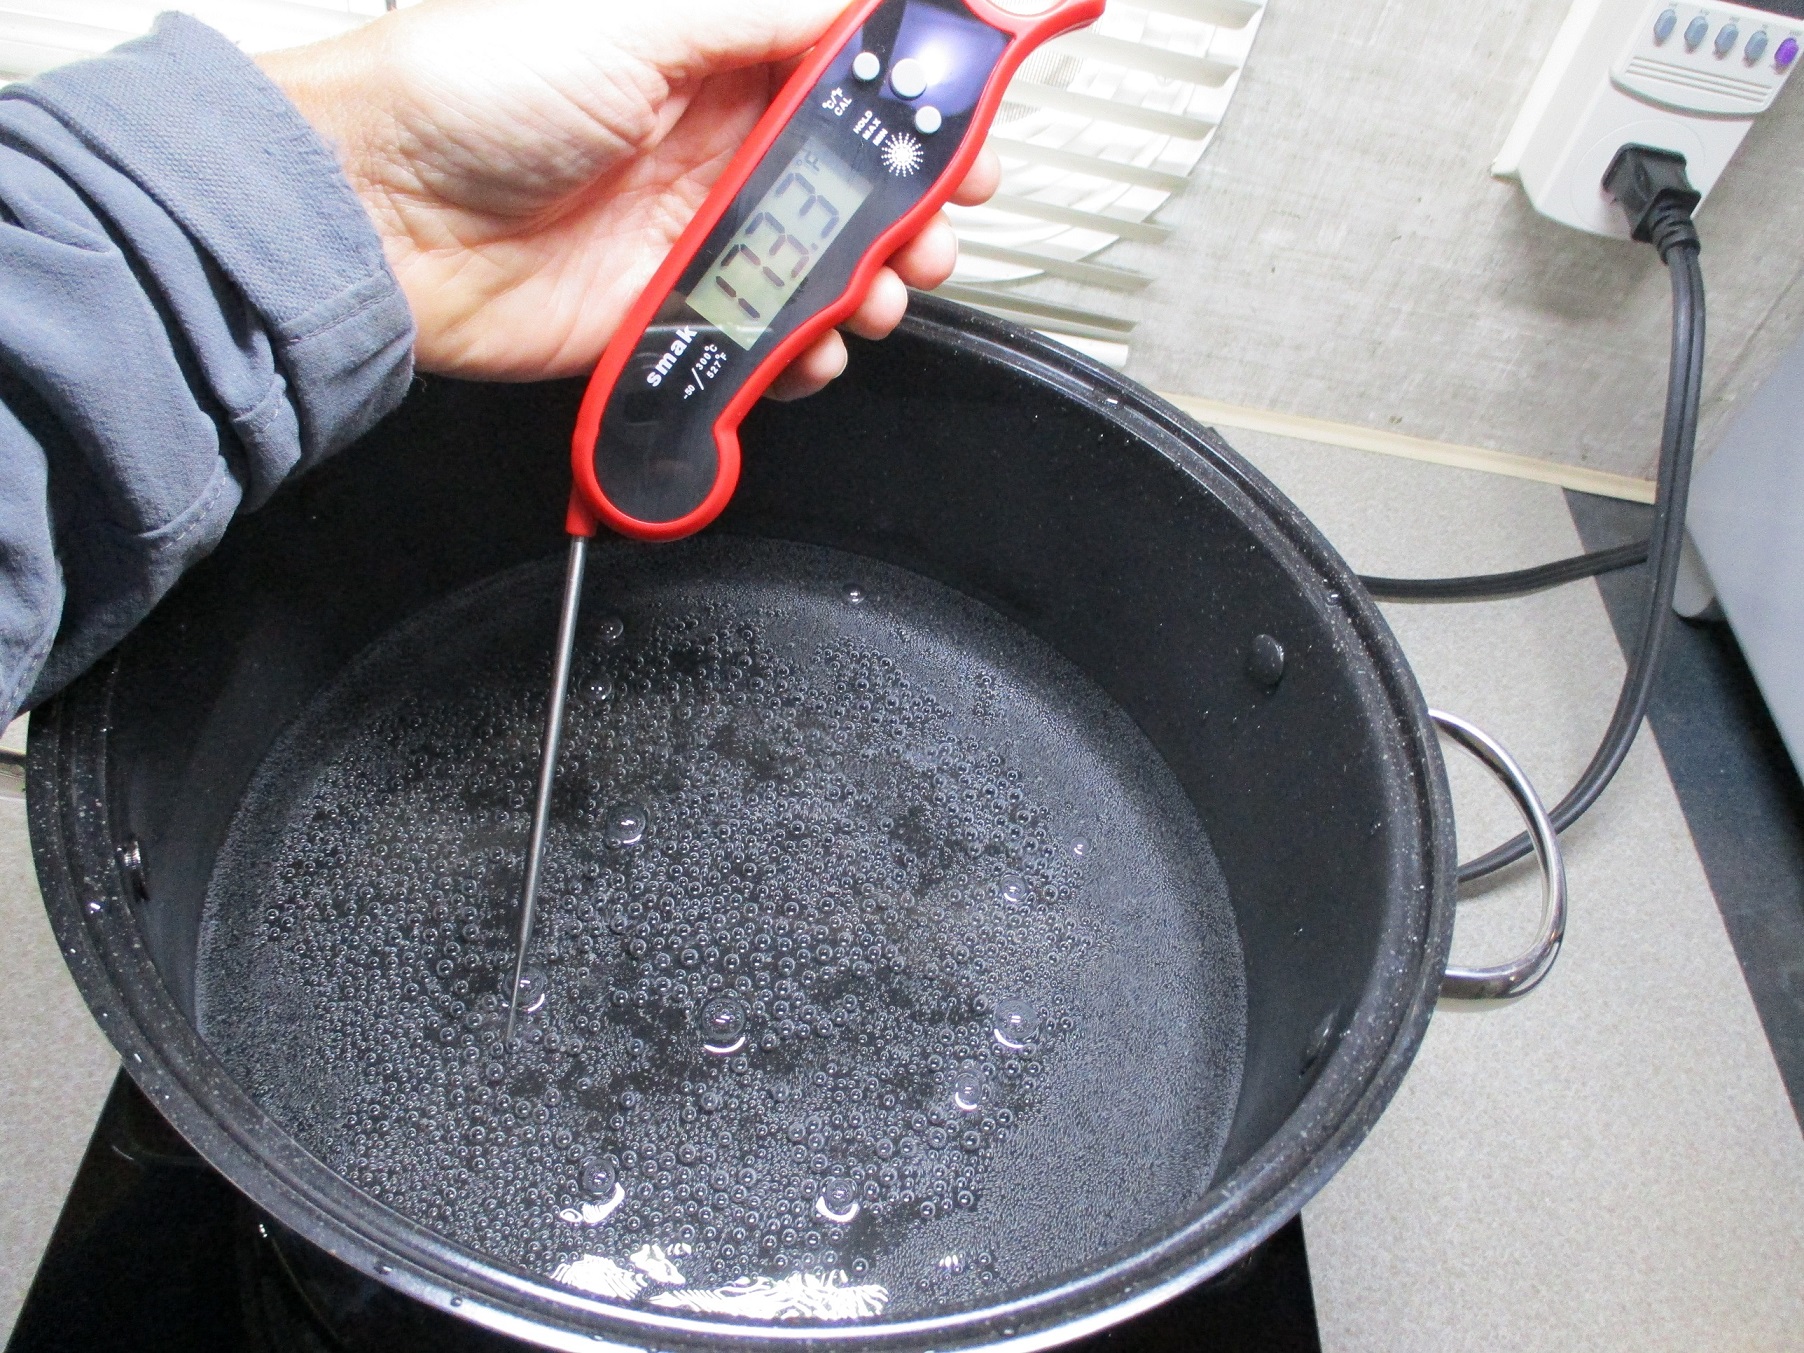 https://allelectricproject.com/wp-content/uploads/2021/04/11-Induction-large-pot-1.jpg